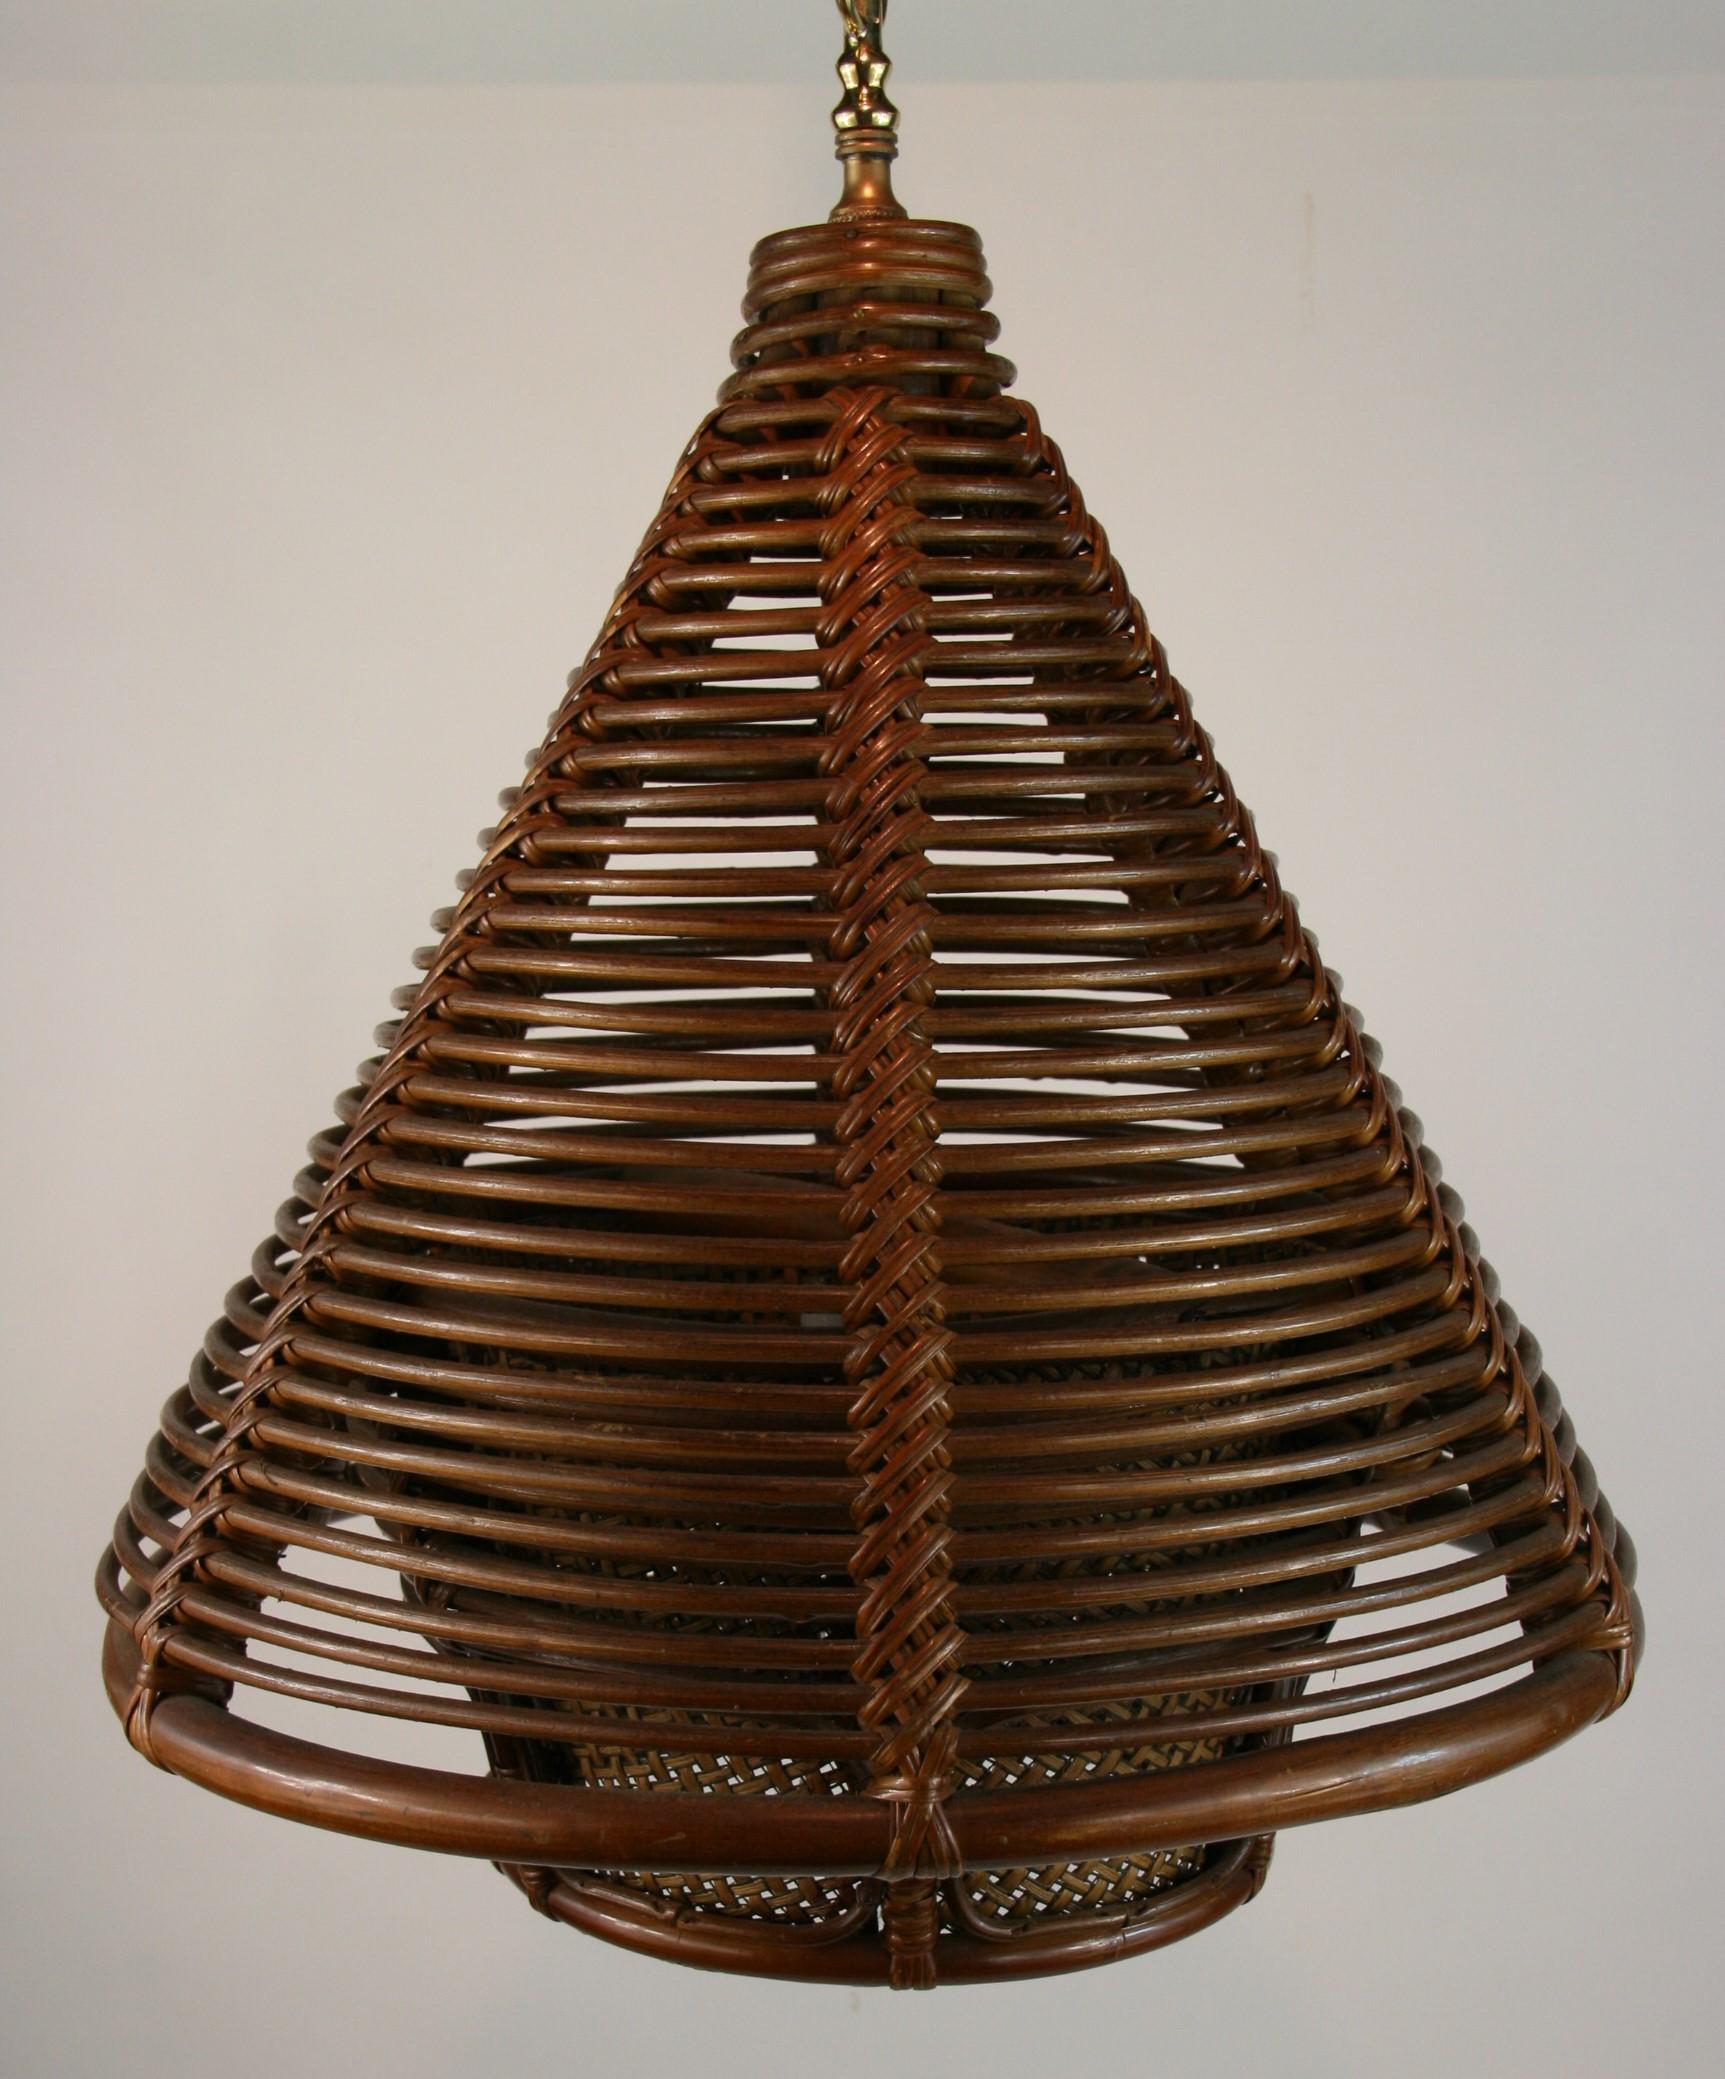 3-444 beautiful large Mid-Century Modern Italian woven wicker and circular rattan pendant.
Fixture is composed of a triangular rapped rattan outer surface and an intricate woven rattan.
A real show stopper one of a kind.Attributed to Gabriella